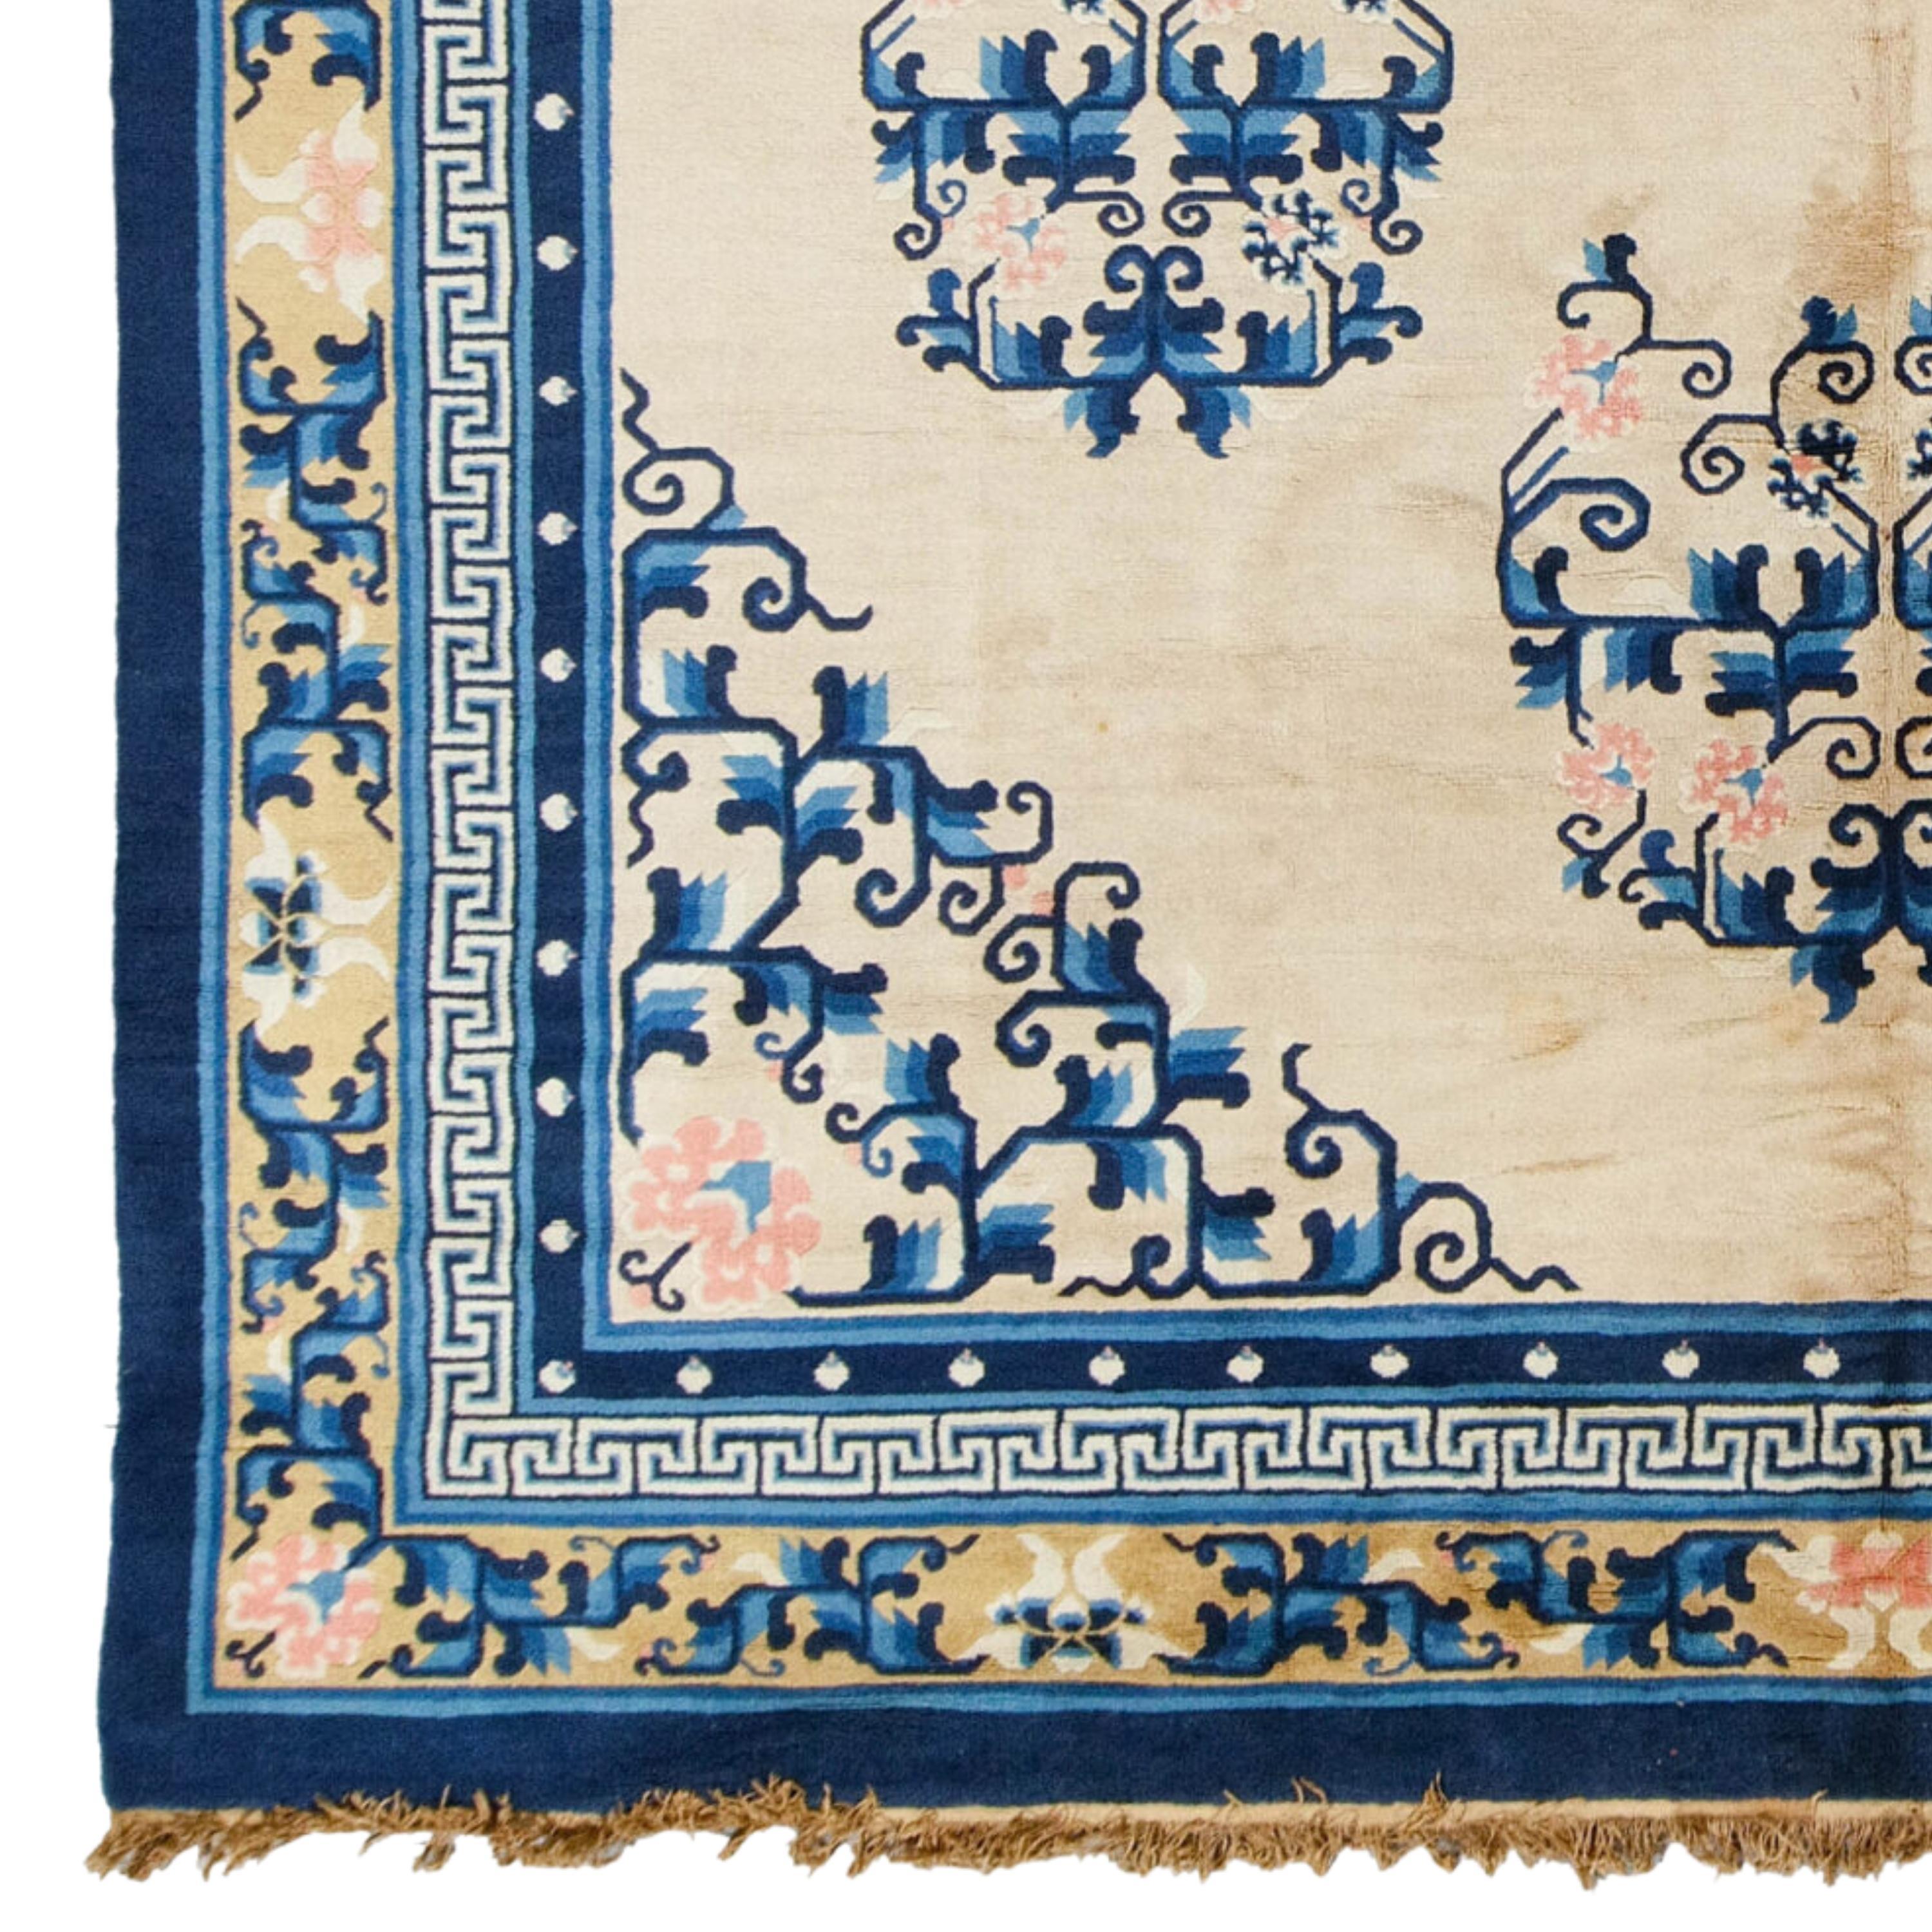 These colors are obtained with natural root dyes. The patterns of ancient Chinese Beijing rugs often include a central medallion in the shape of a large eight-pointed star or diamond and smaller medallions at the corners. These medallions are